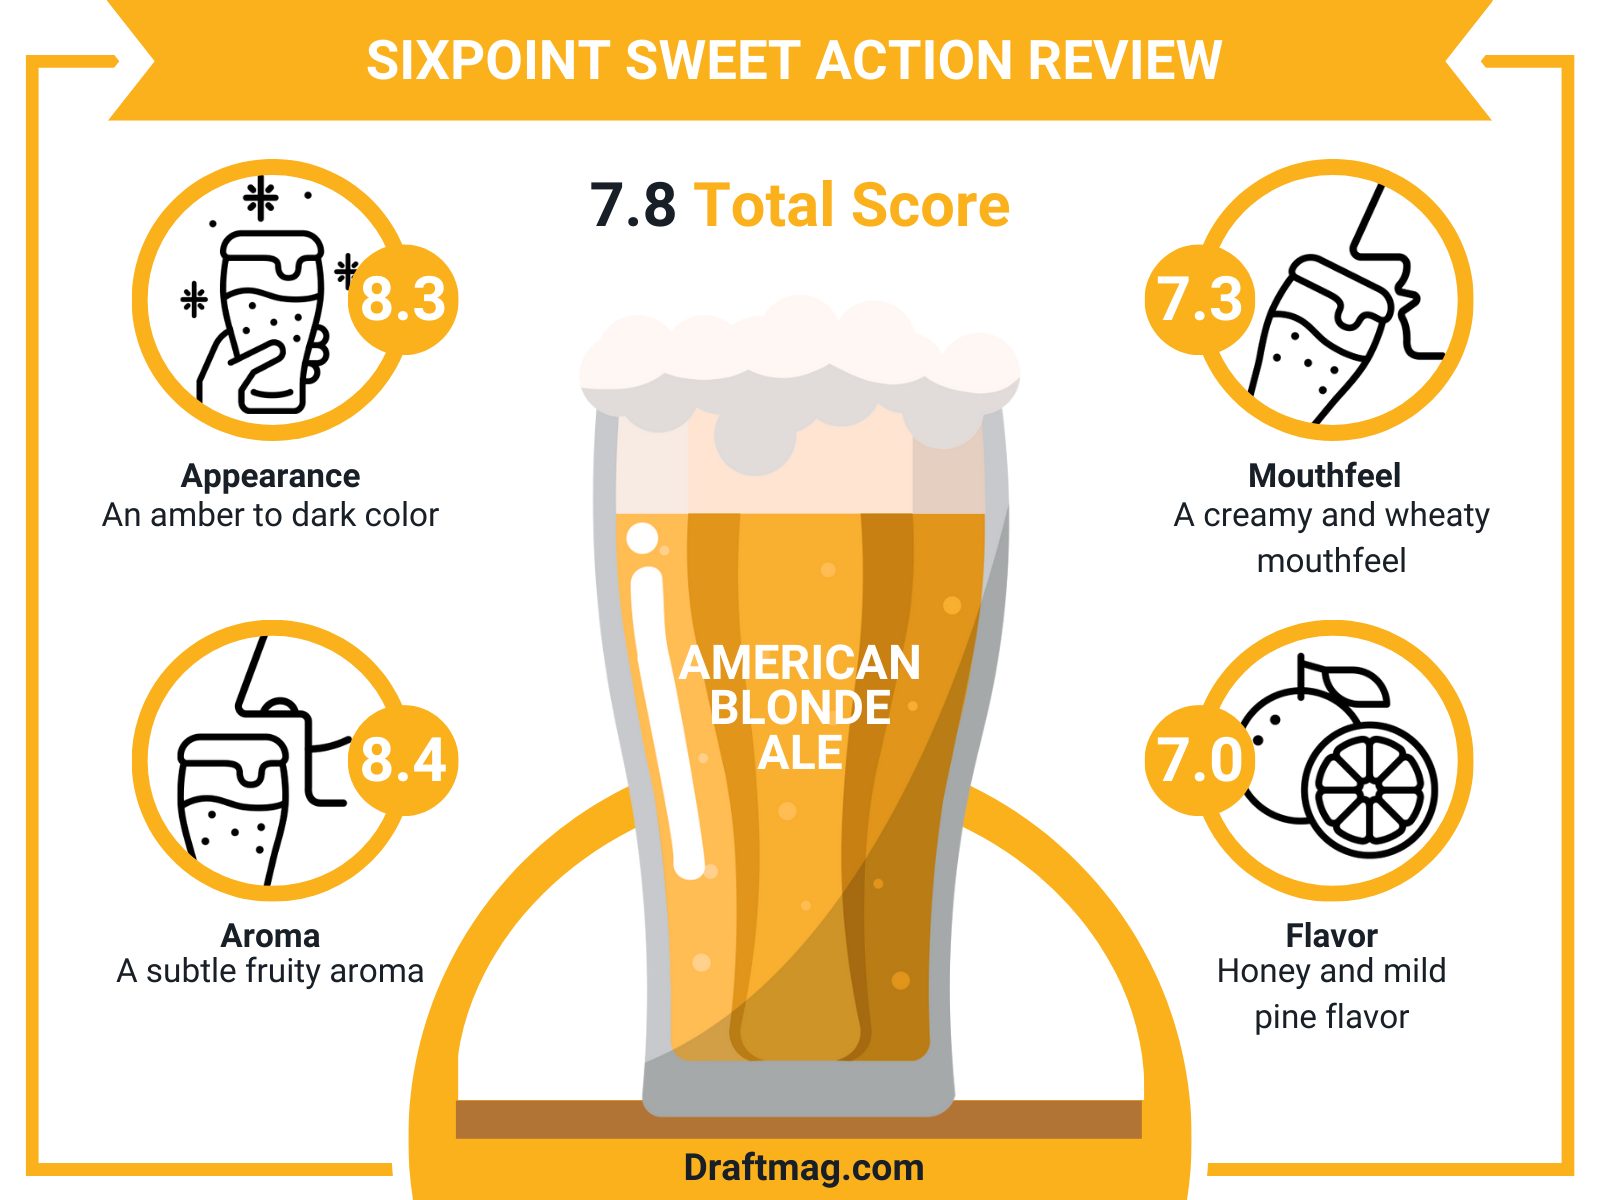 Sixpoint Sweet Review Infographic